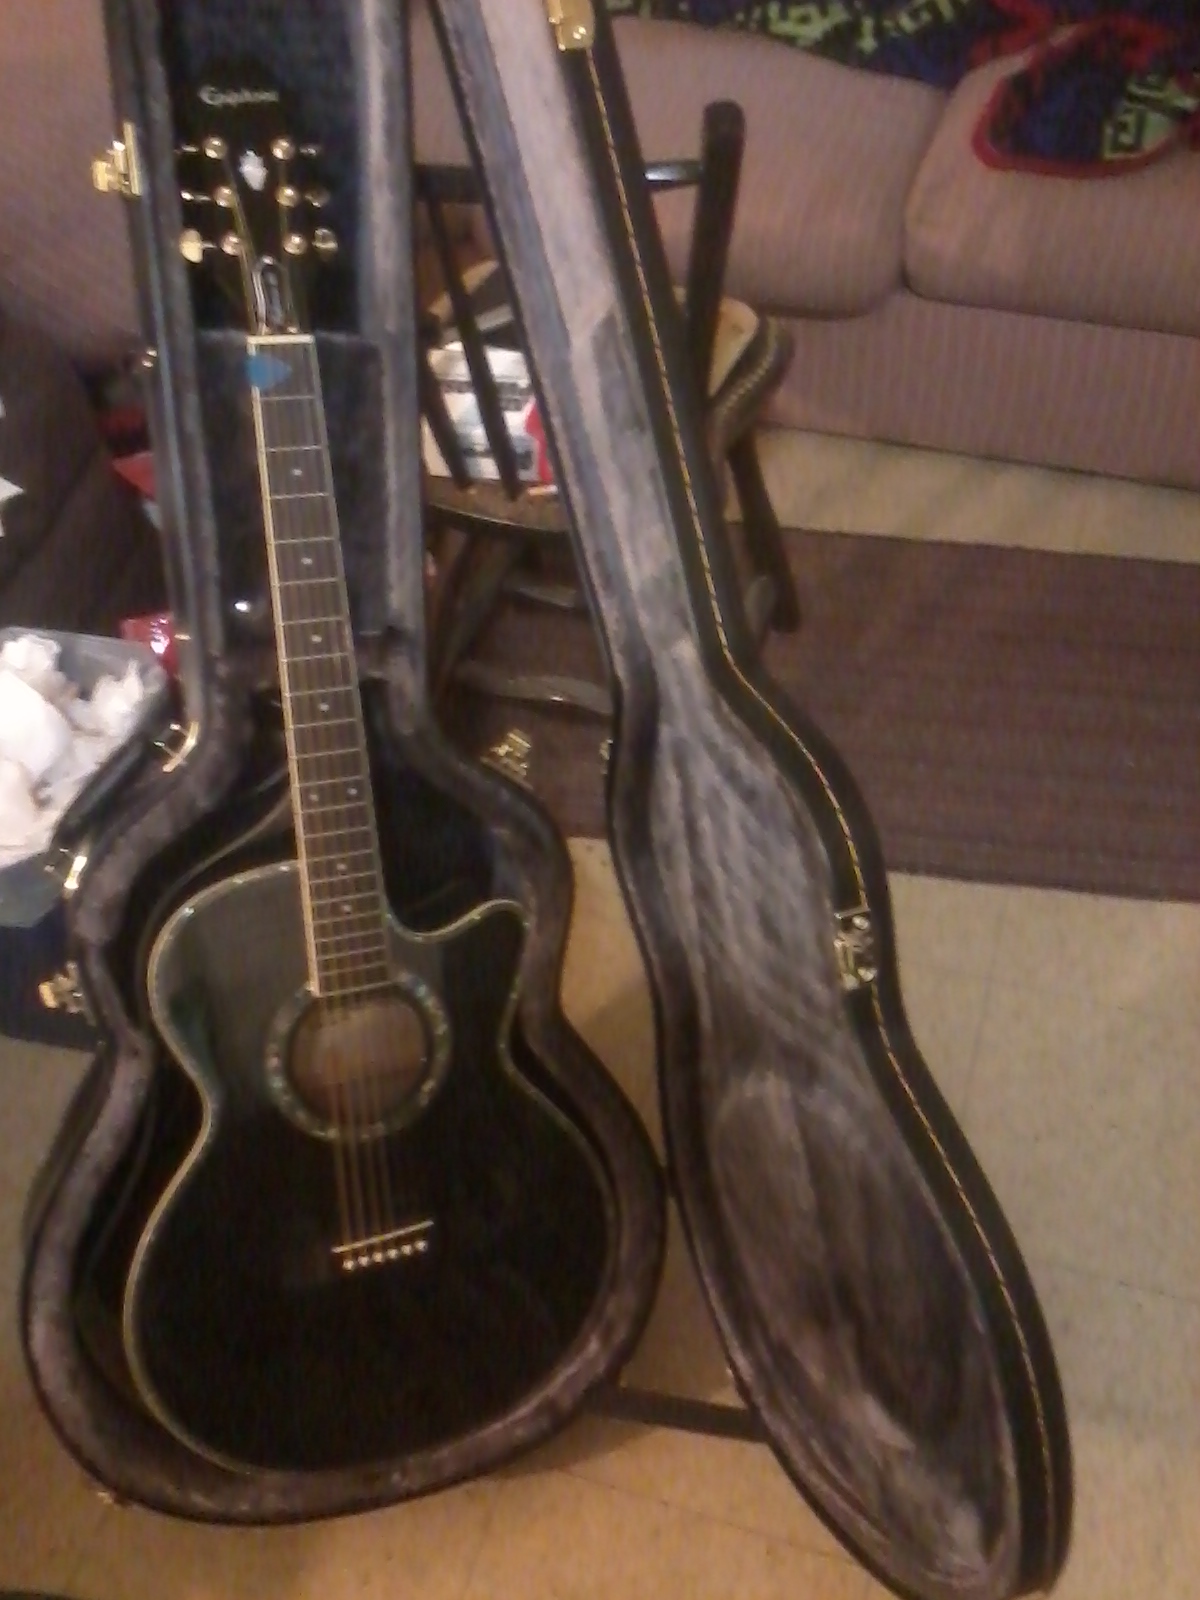 the guitar I just bought